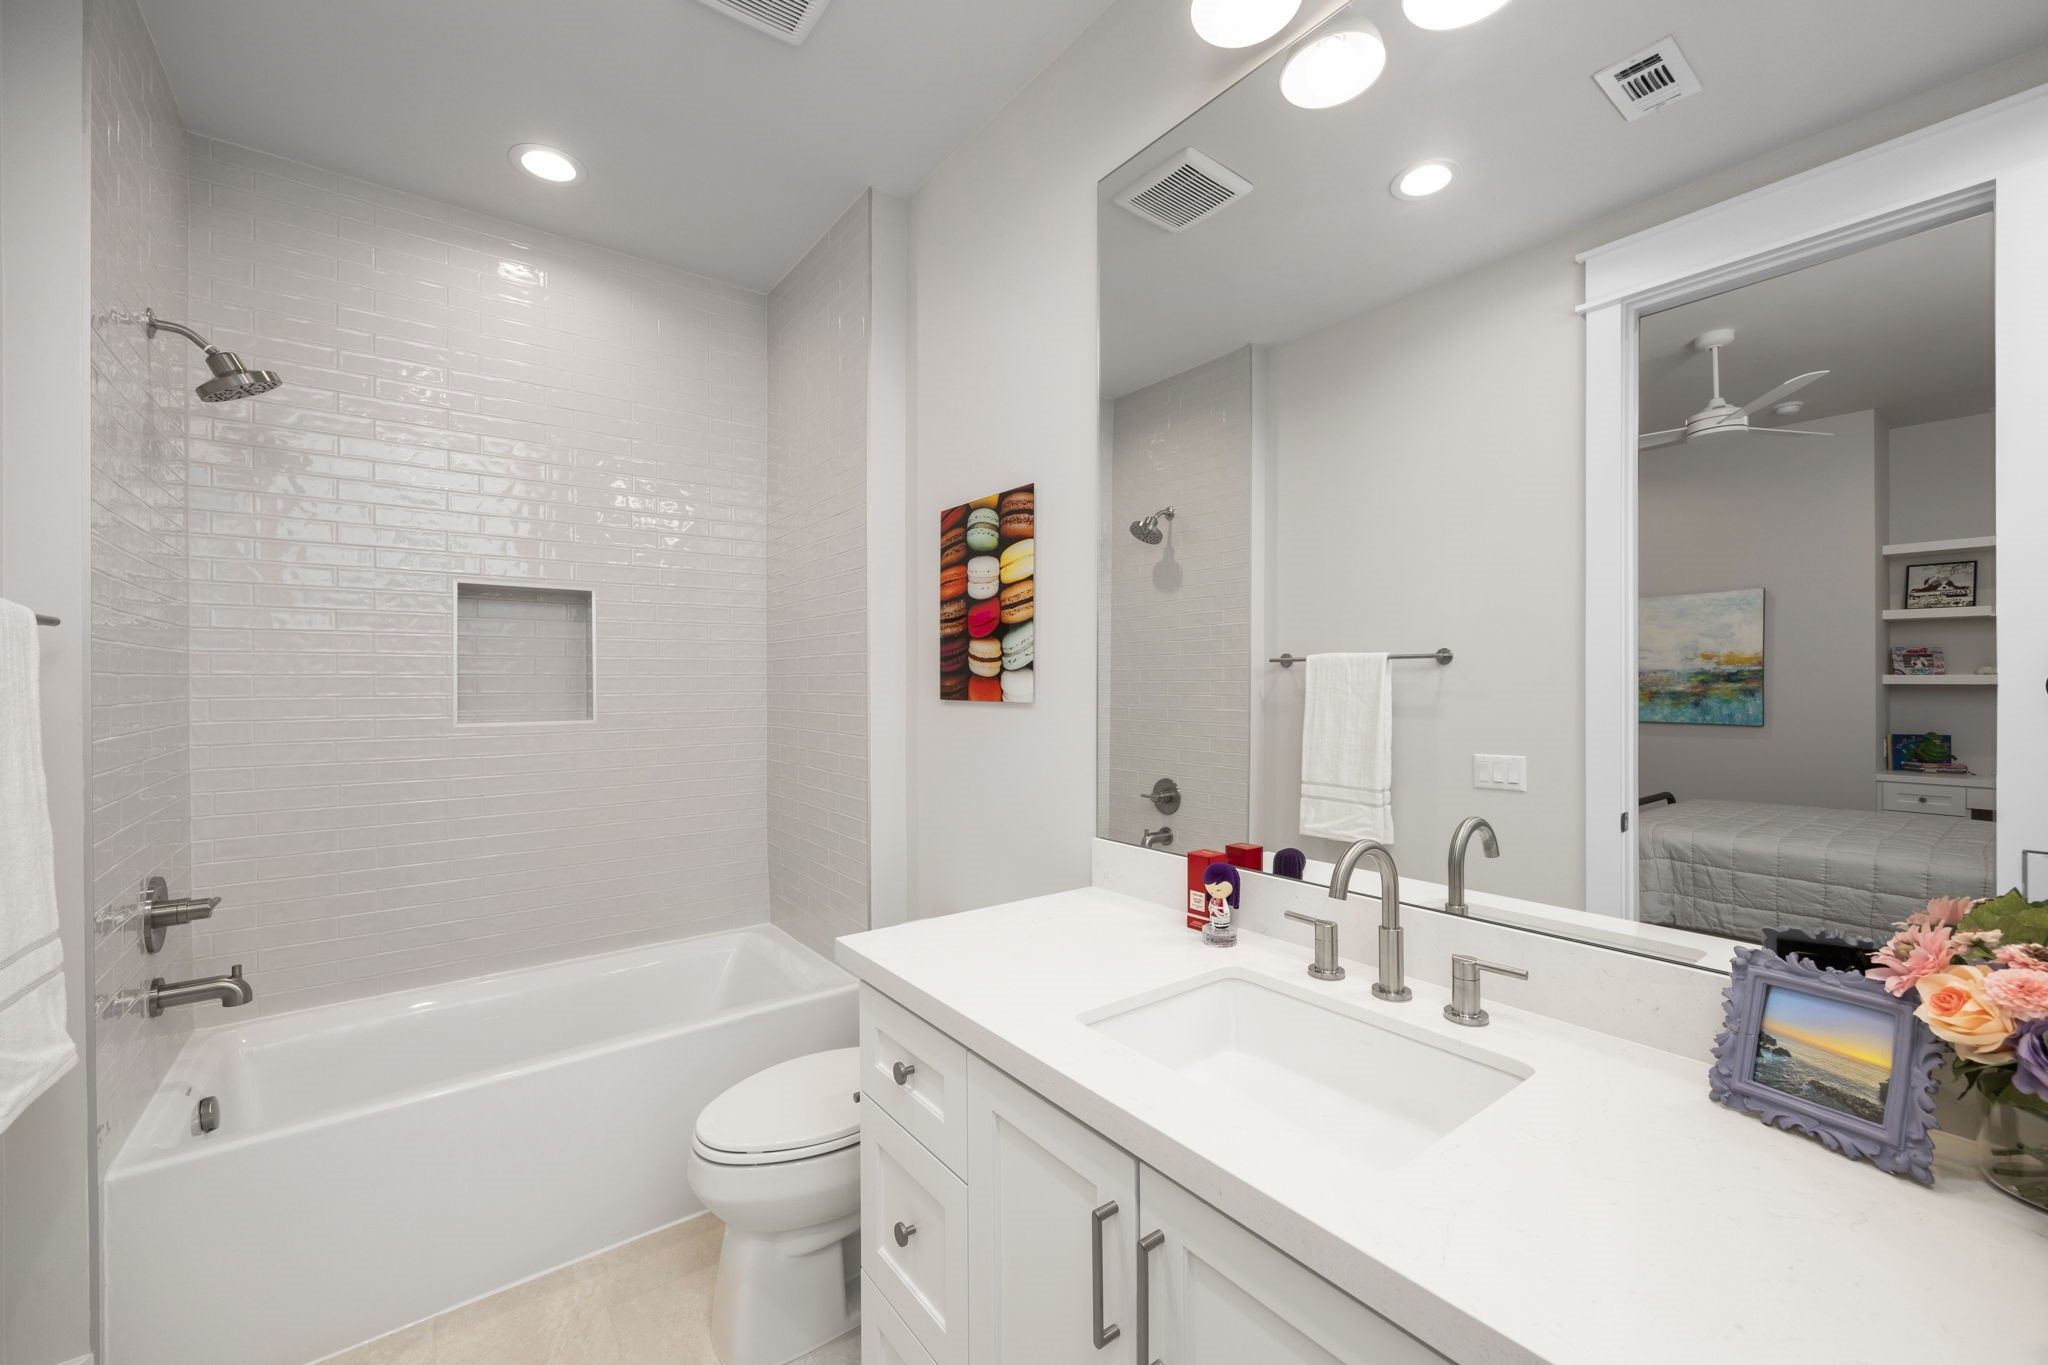 The laundry room has a large utility sink with drip rod above to air dry your intimates.  On the opposite wall you will find a mop closet and the connections for the washer and dryer.